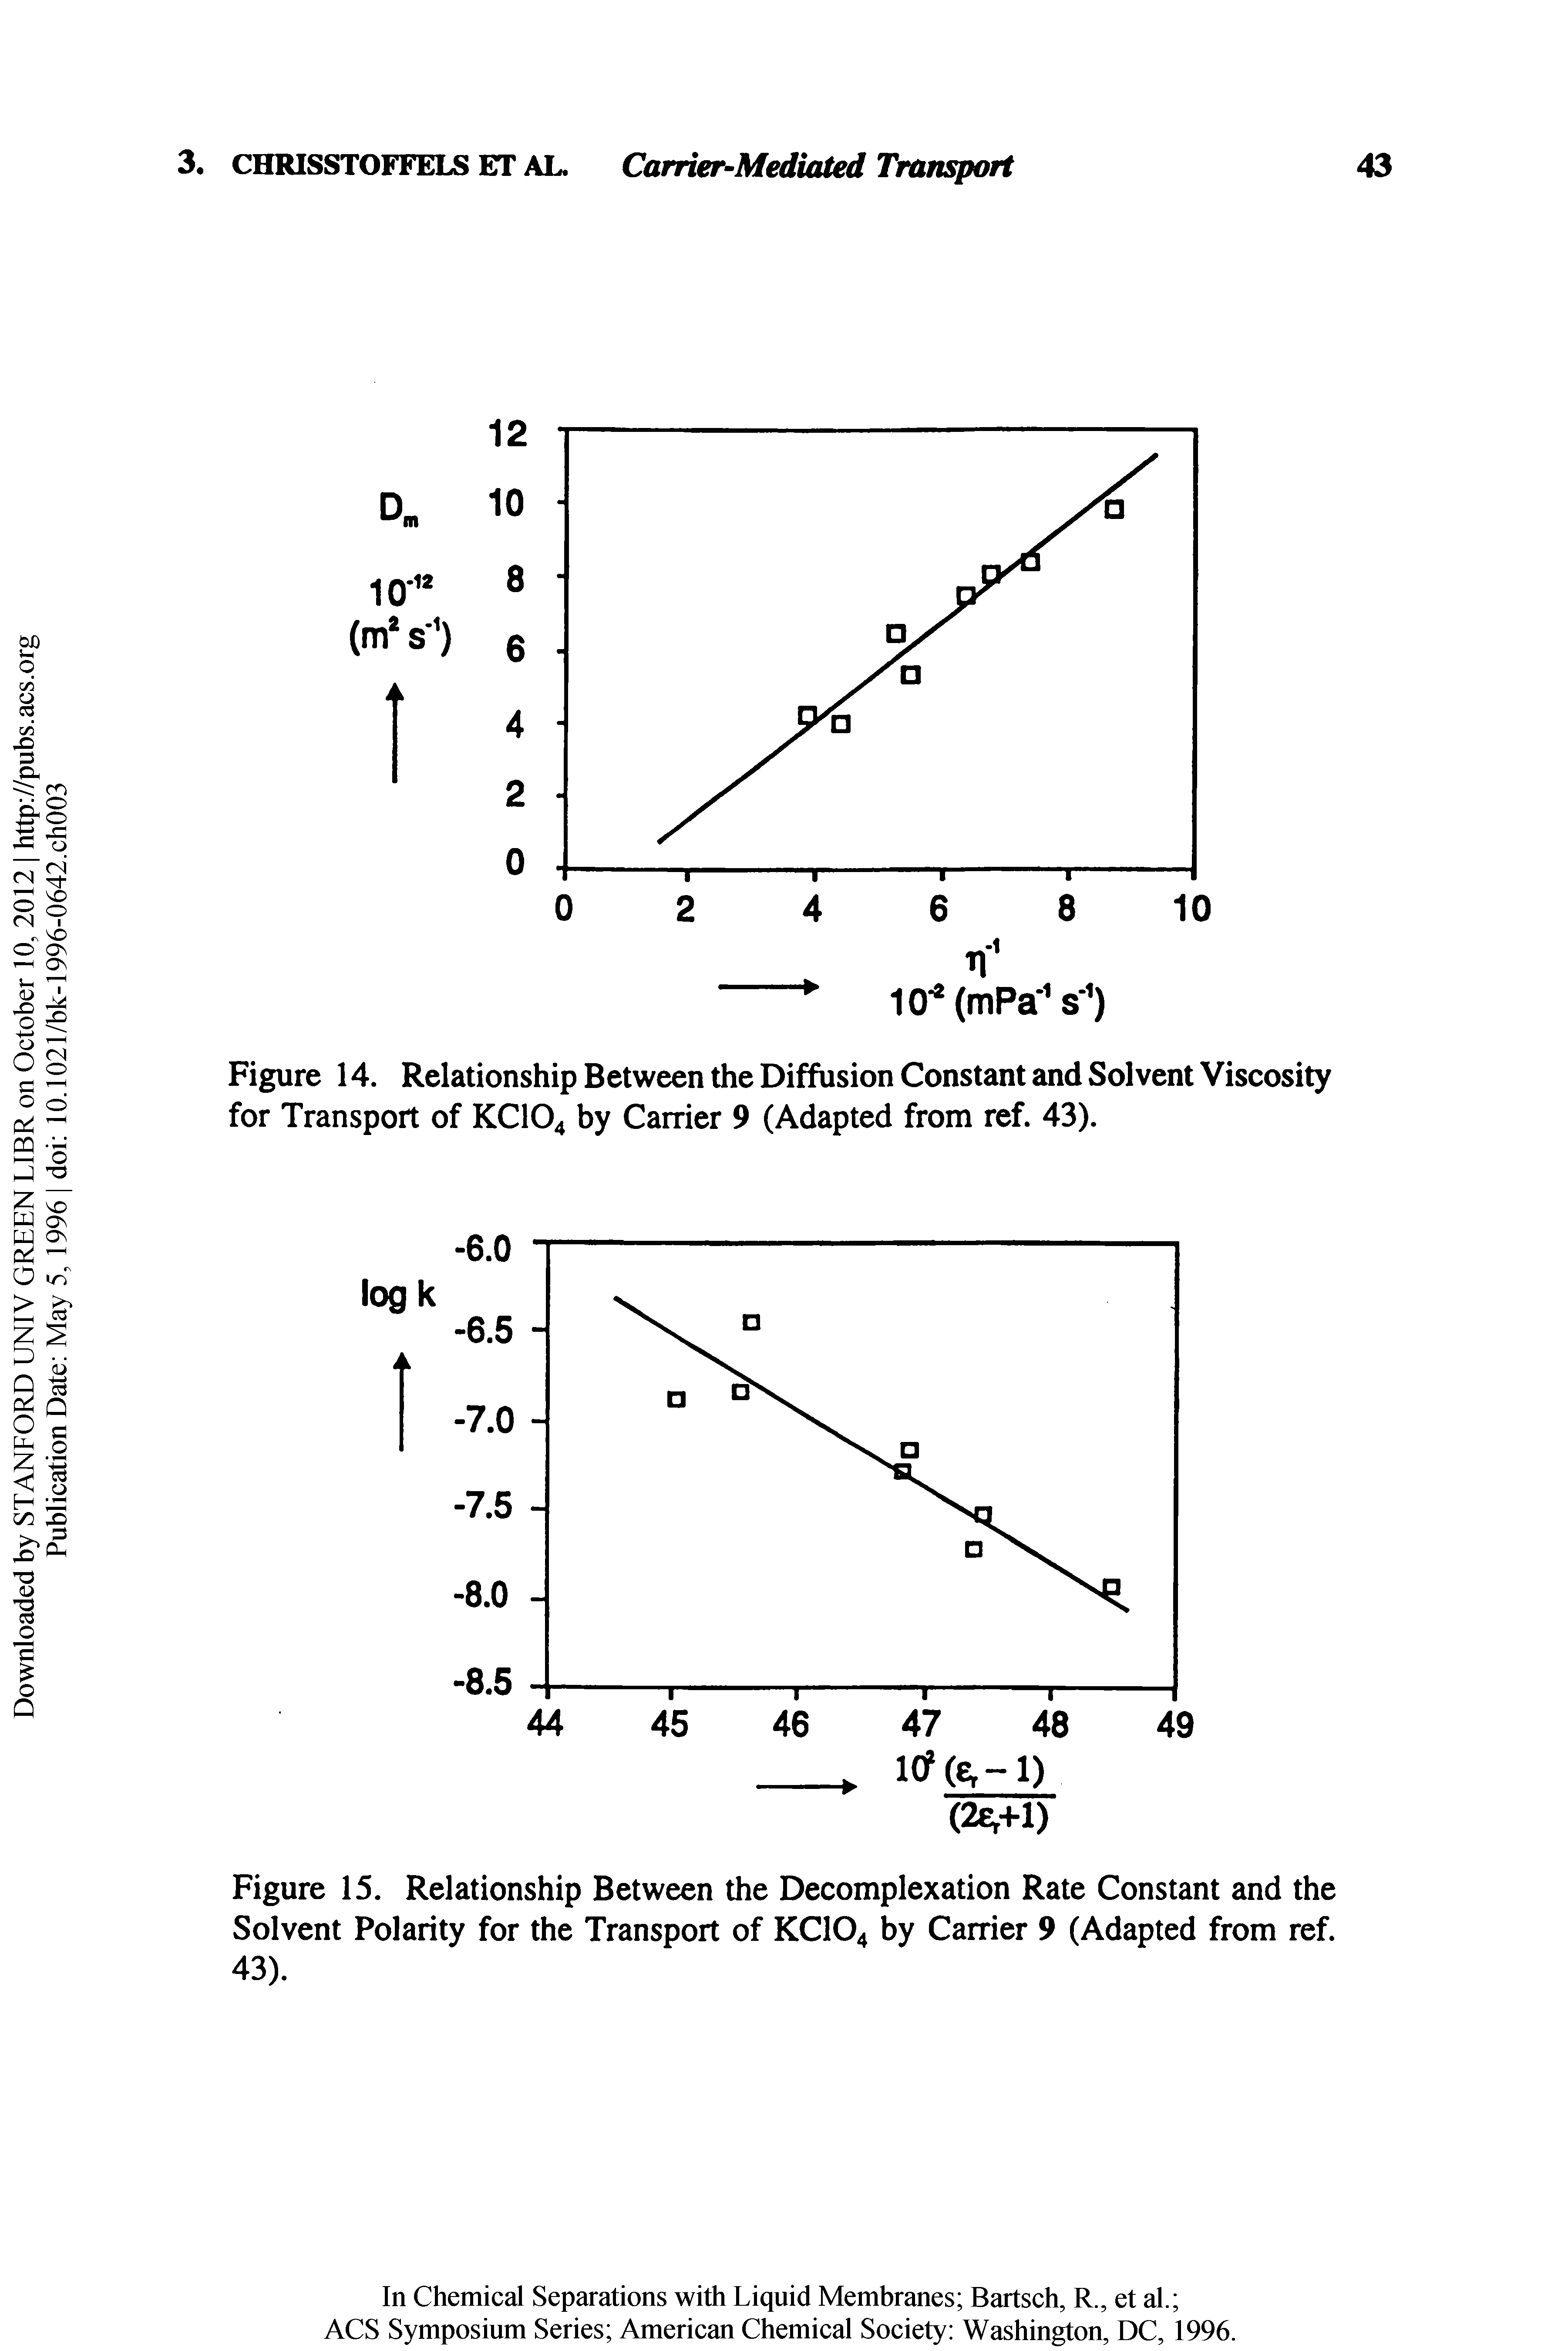 Figure 15. Relationship Between the Decomplexation Rate Constant and the Solvent Polarity for the Transport of KCIO4 by Carrier 9 (Adapted from ref. 43).